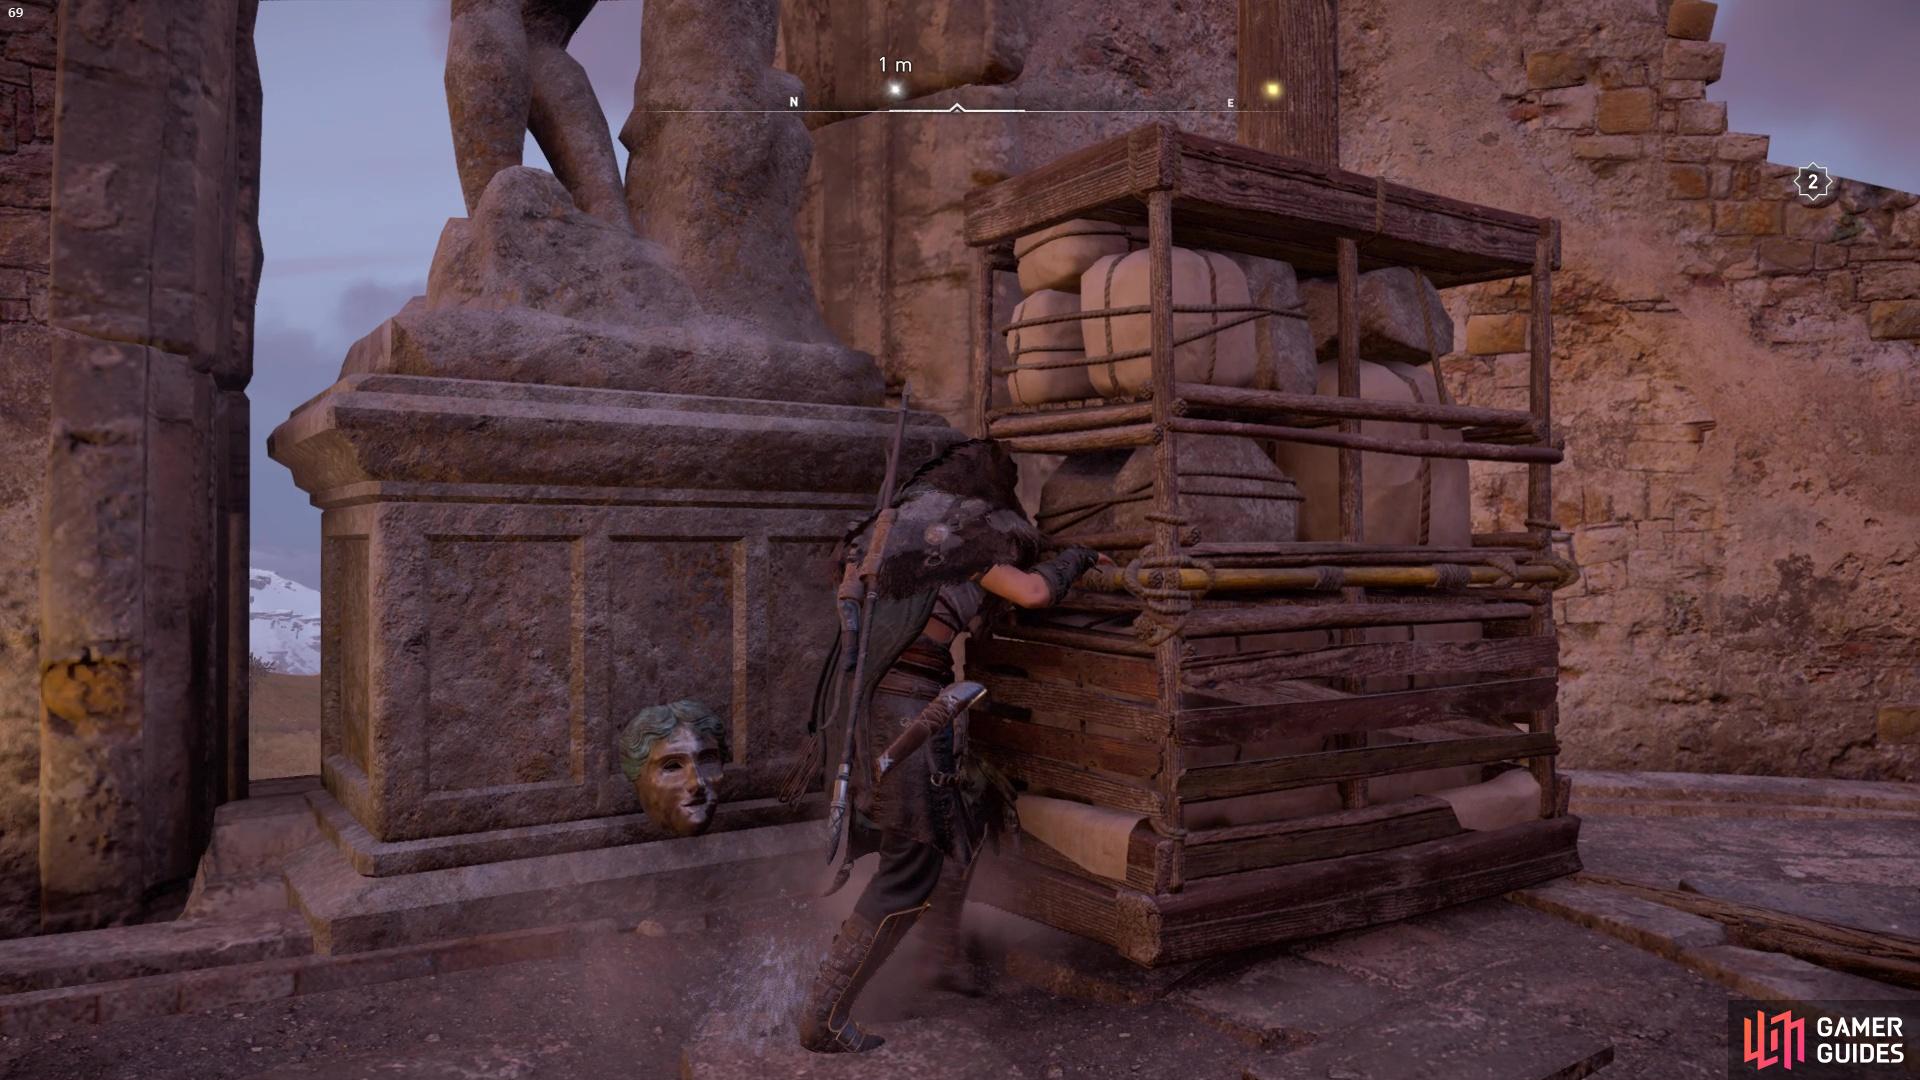 climb up onto the higher platform then move the barricade near the statue to reach the Roman Artifact.